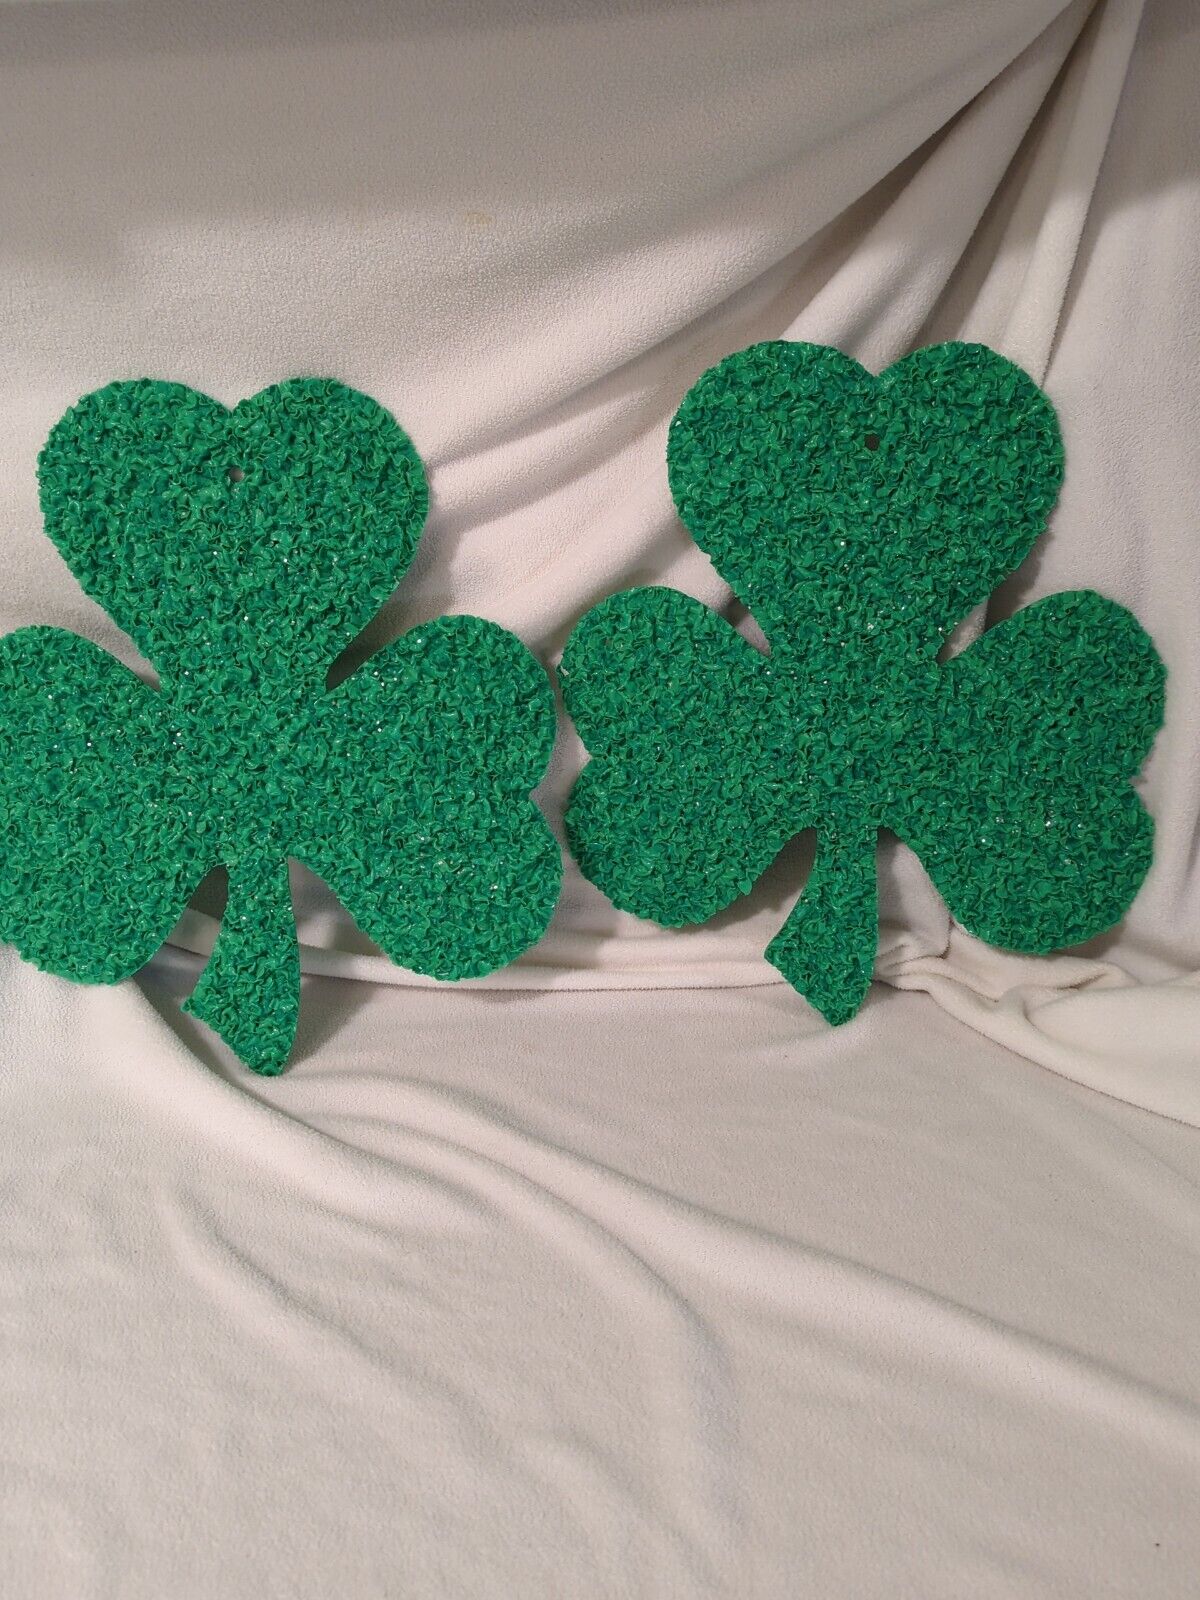 (2) -Two Vintage ERIN GO BRAGH  Shamrocks HAND MADE in AMERICA with PRIDE U.S.A.